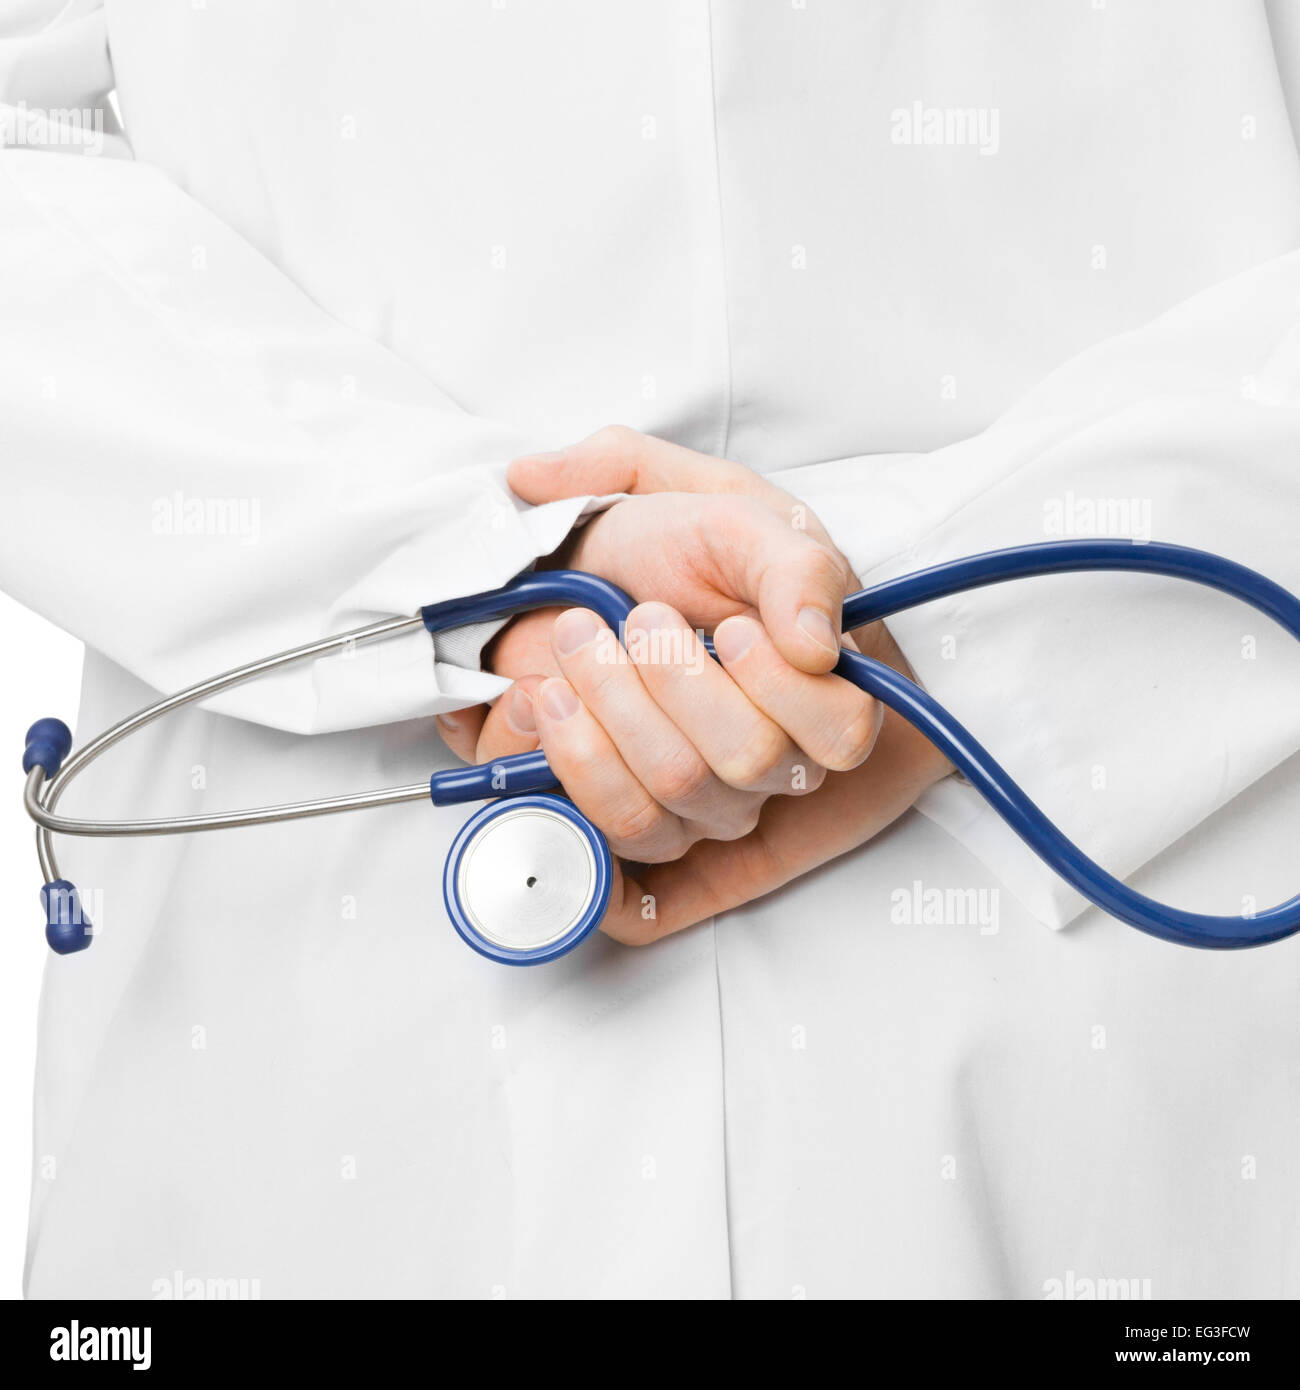 https://c8.alamy.com/comp/EG3FCW/medical-doctor-with-a-stethoscope-and-hands-behind-his-back-EG3FCW.jpg